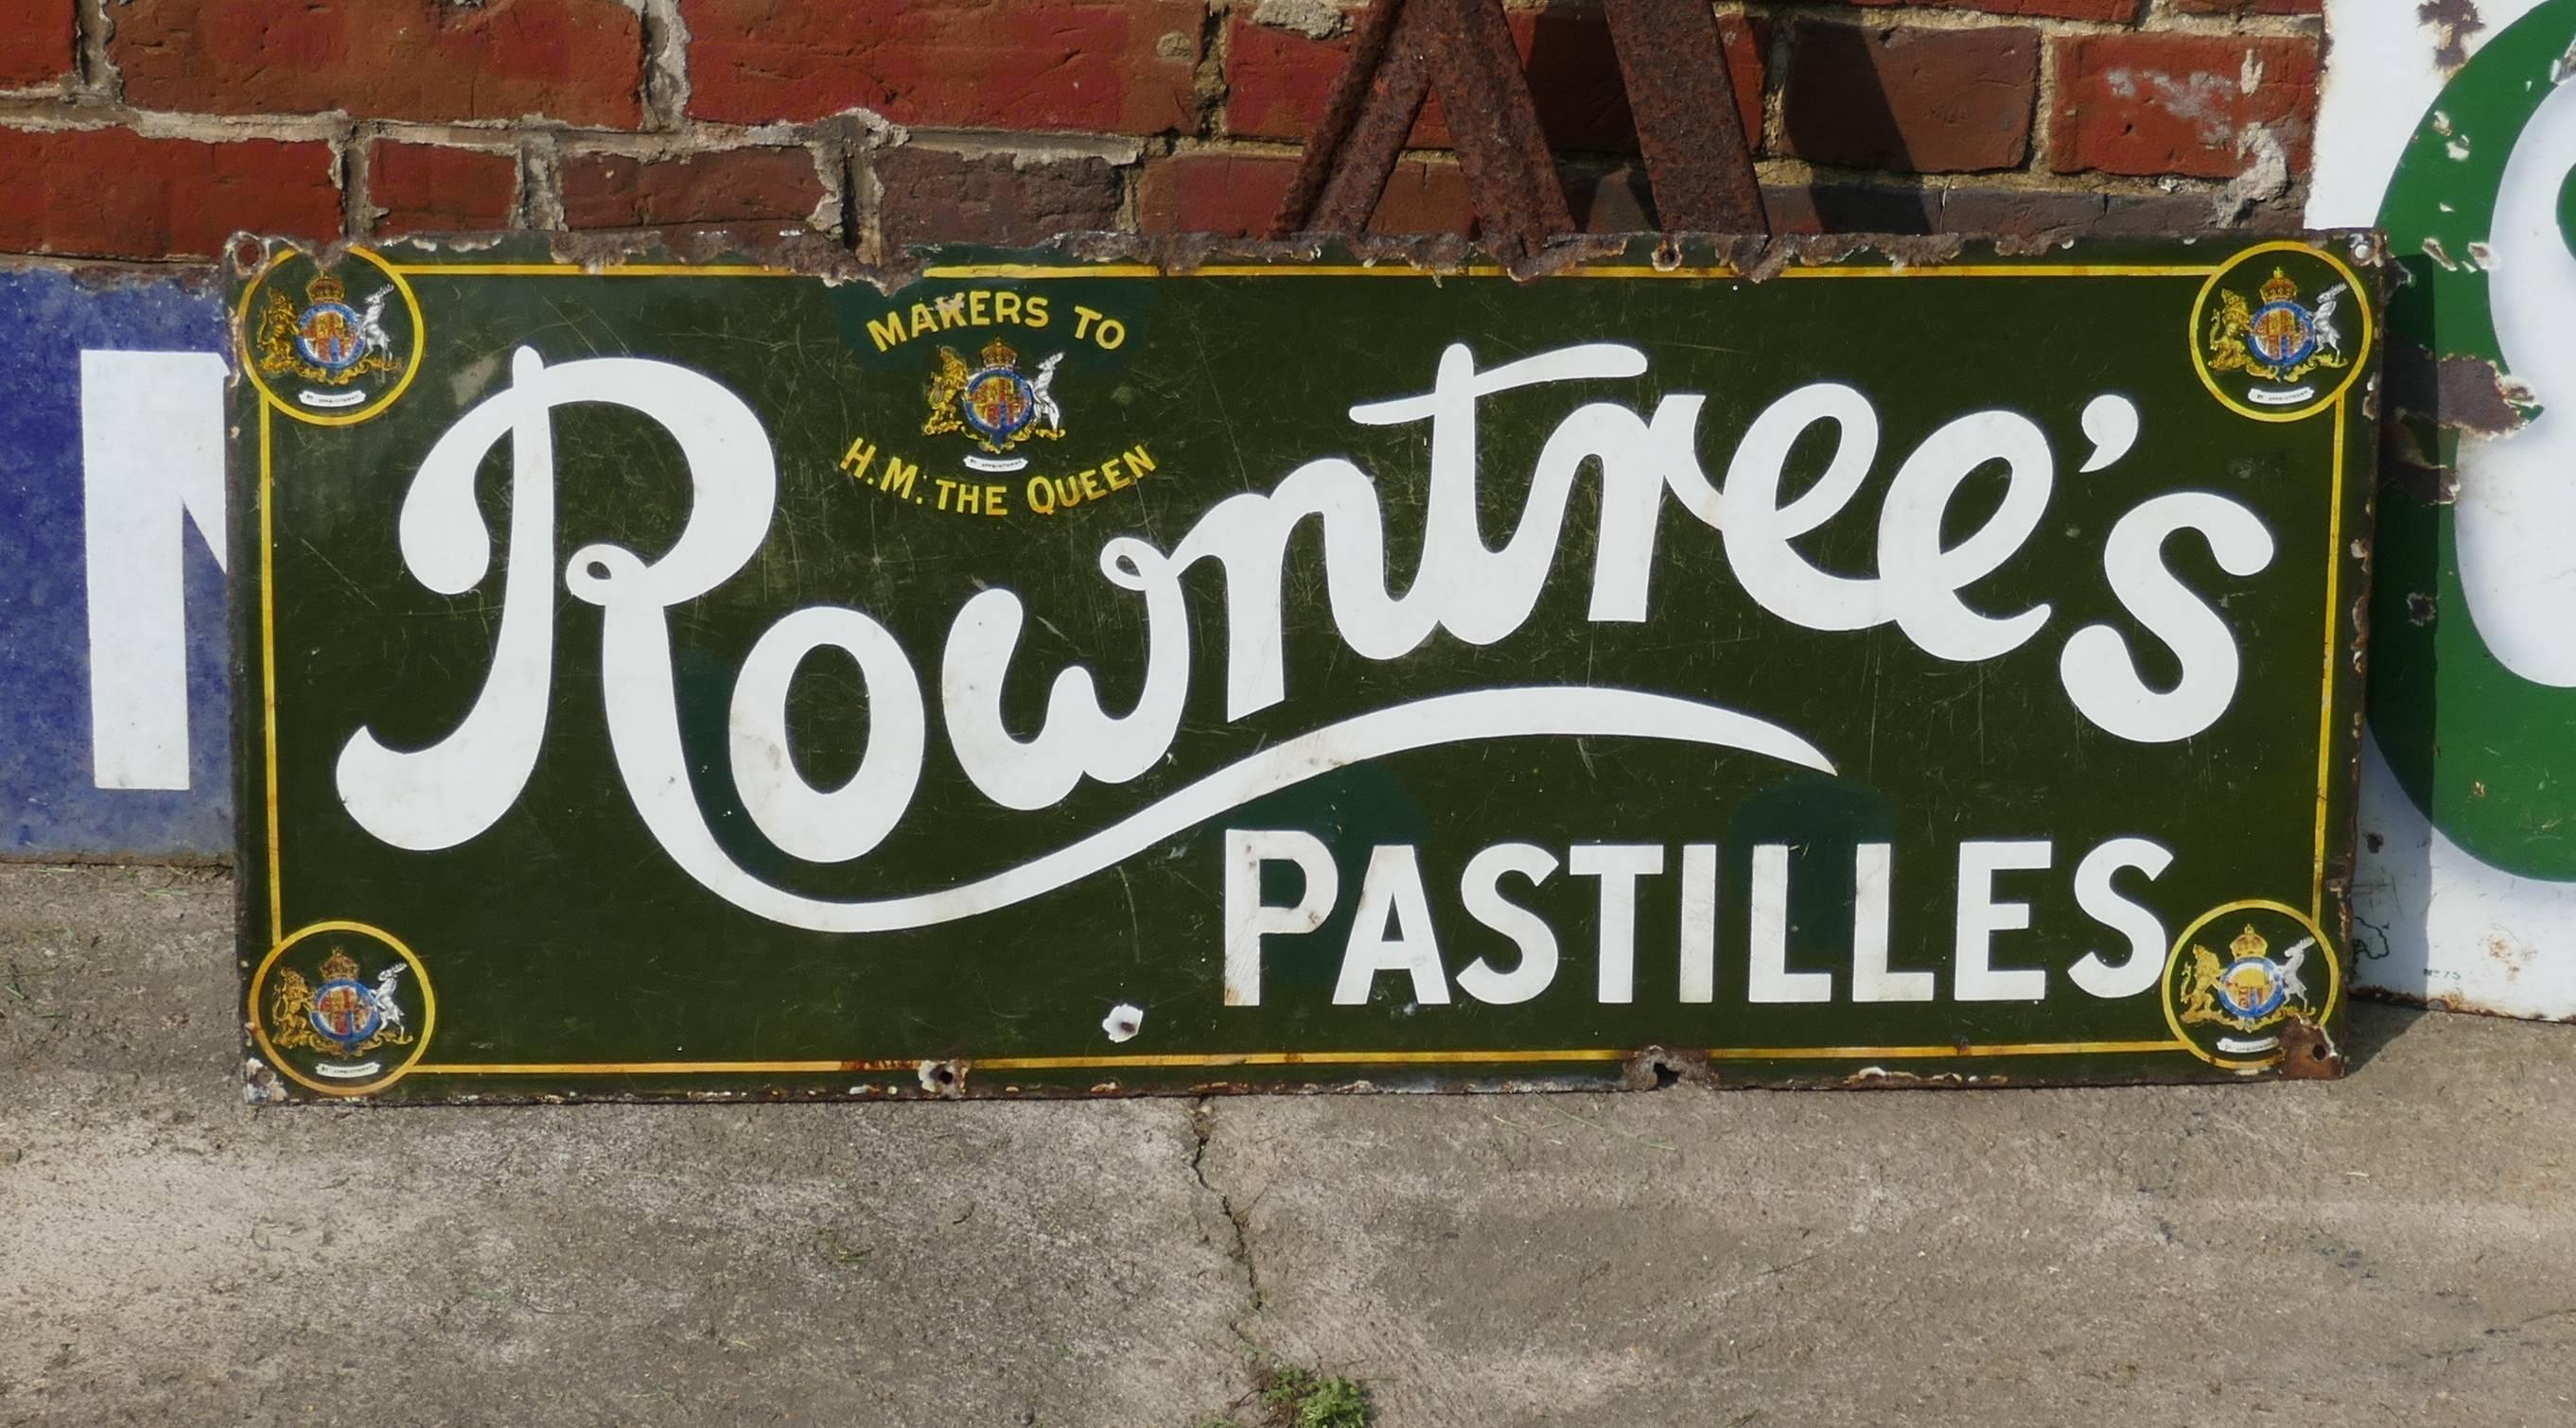 Original Rowntree's Pastilles enamel sign 

Very rare old sign, dark green background picked out with a yellow border and showing 5 Royal Warrants 
The sign is in good general condition it is made in ceramic enamel and has some rust and chipping